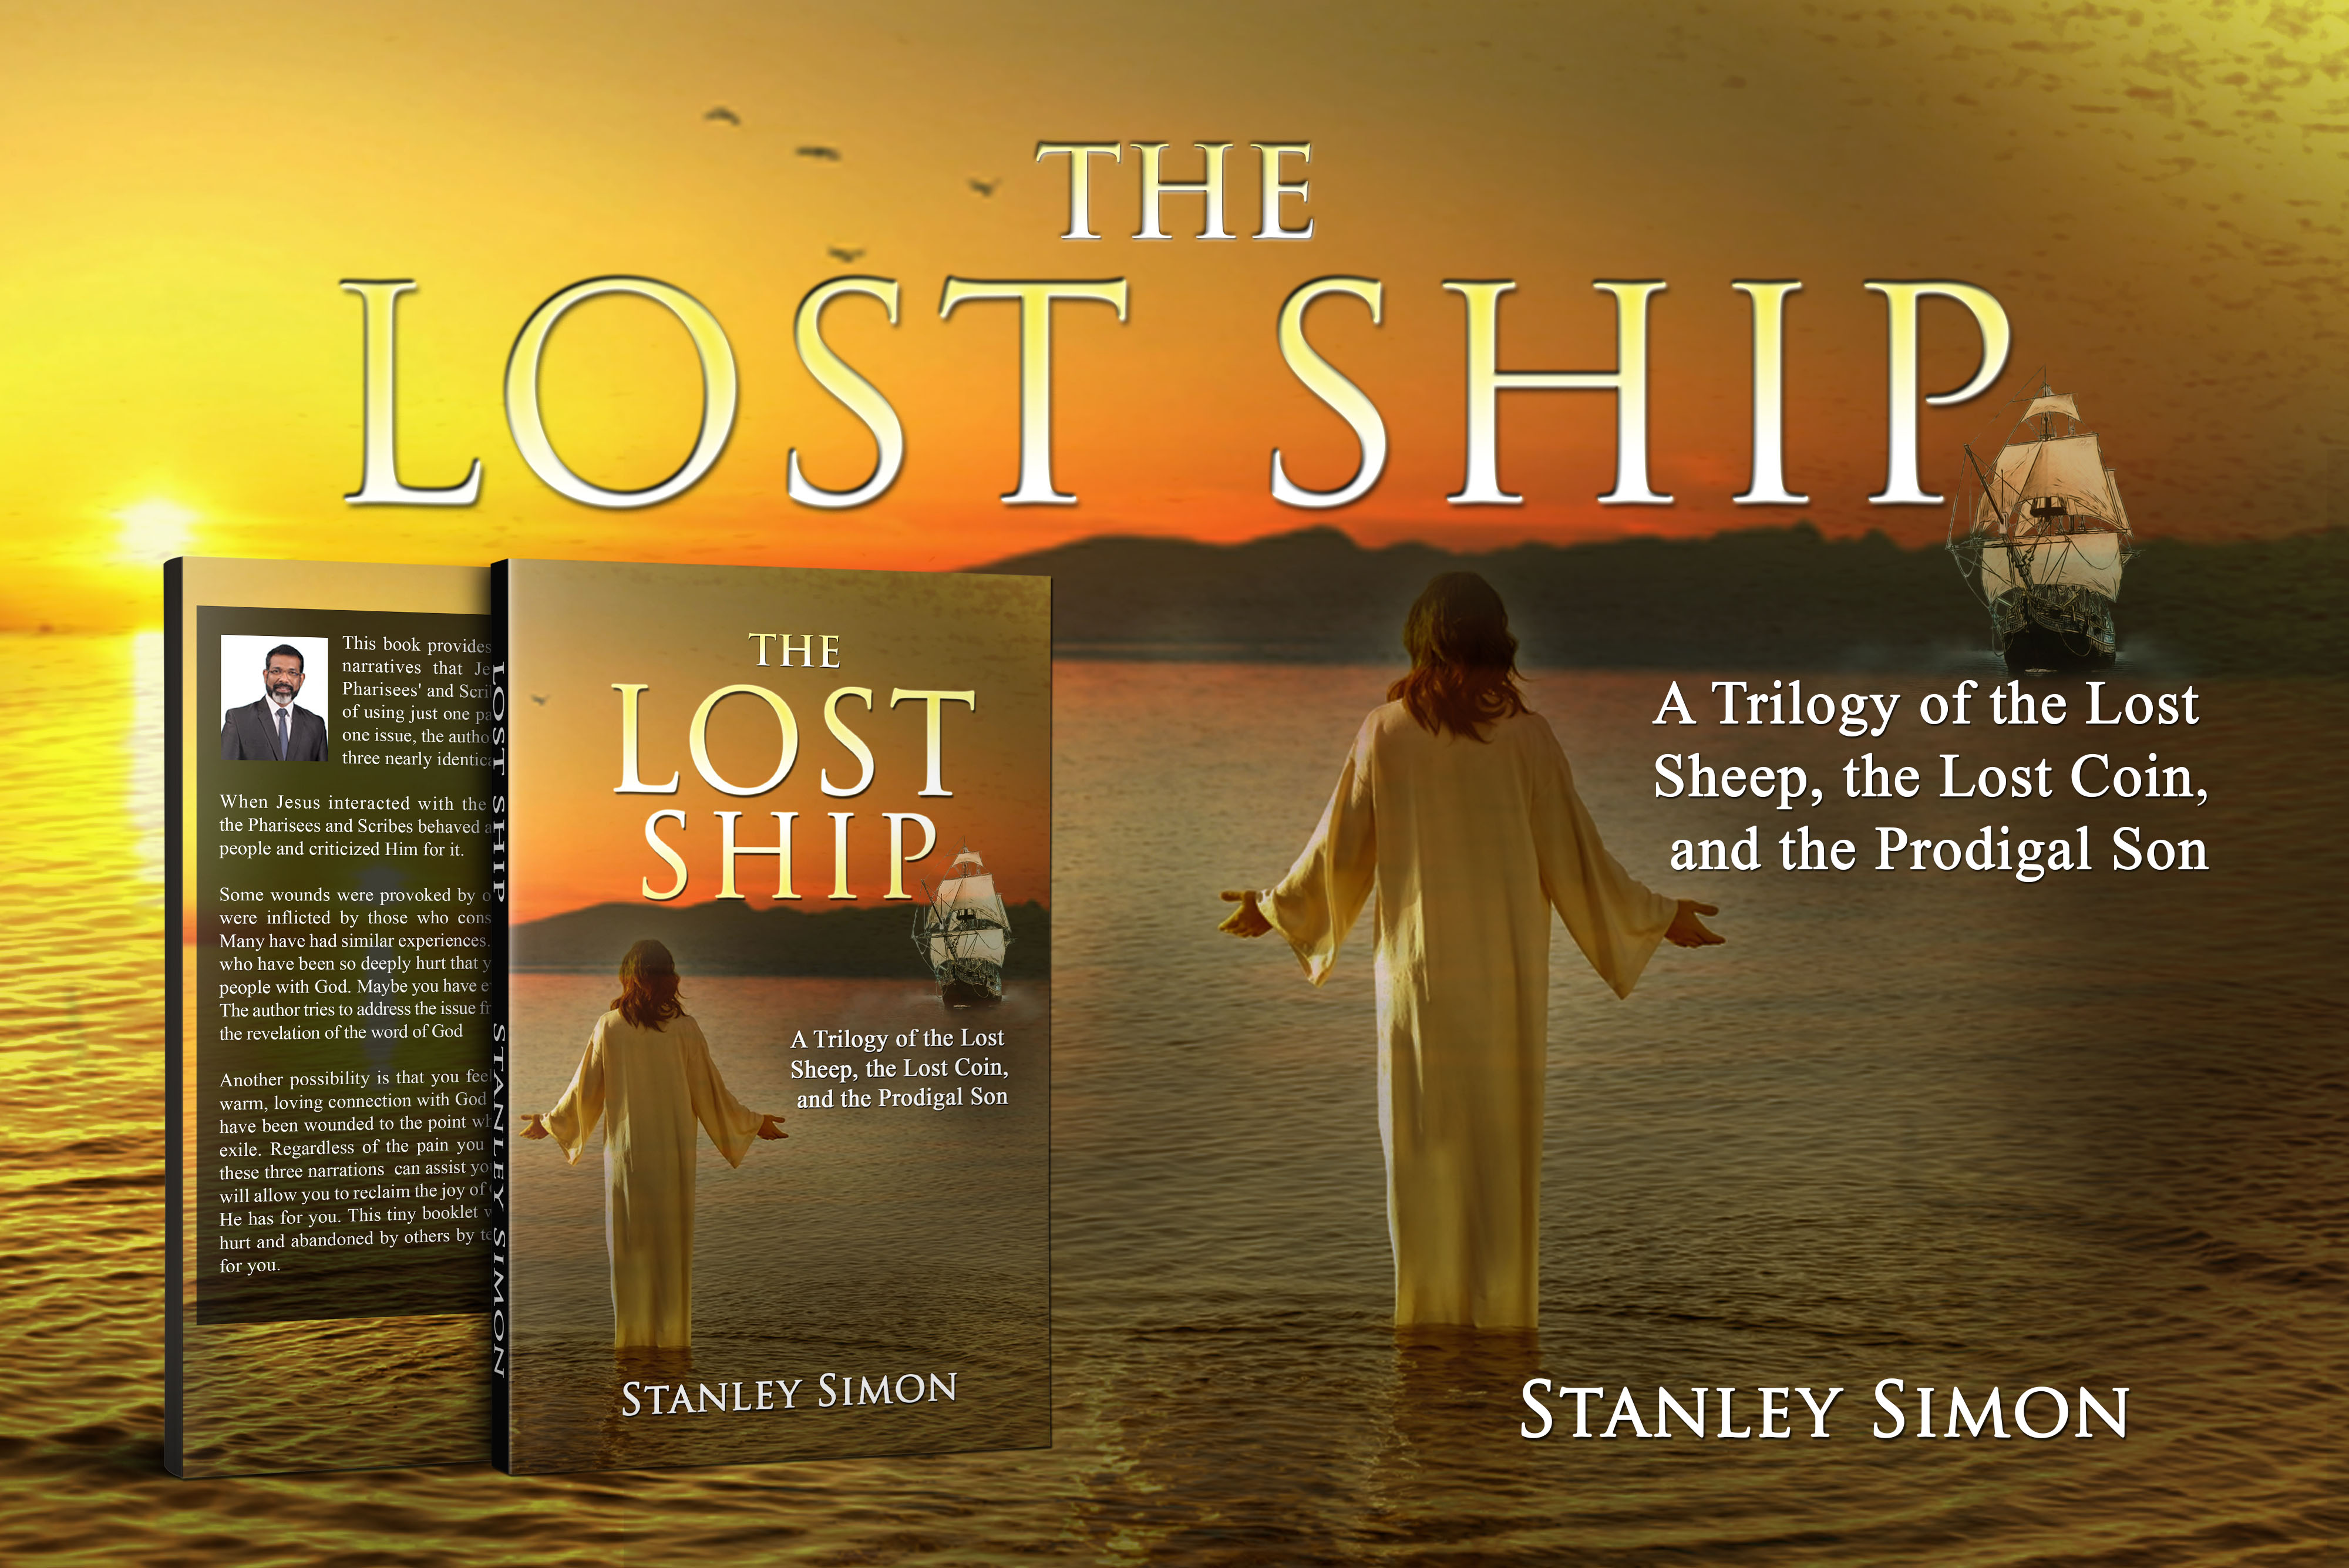 "The Lost Ship" - Stanley Simon's new title touches the hearts of rejected